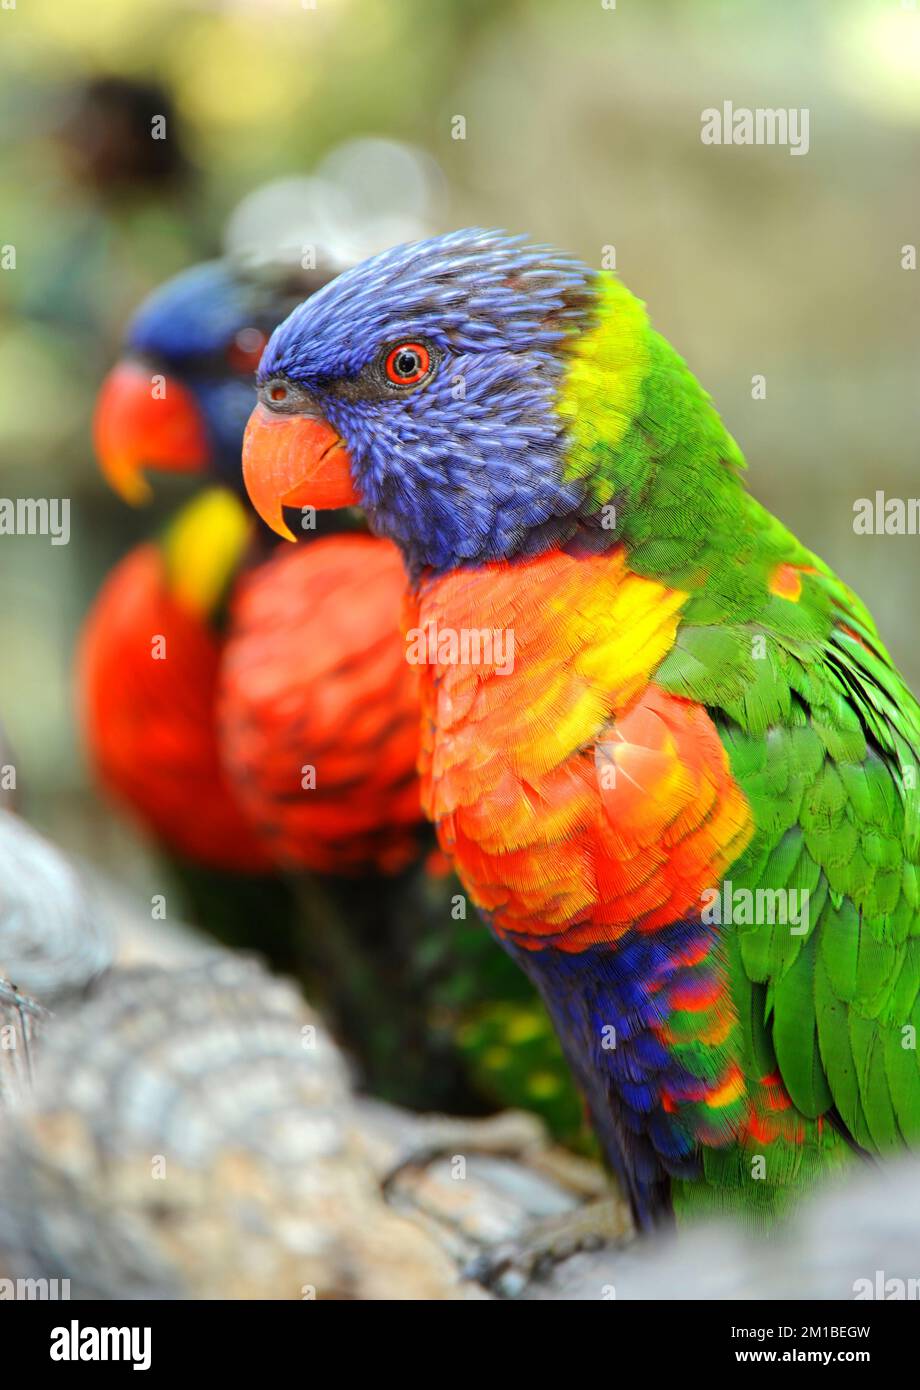 These Rainbow Lorikeets are perched on a branch and looking very colorful and tame. Stock Photo